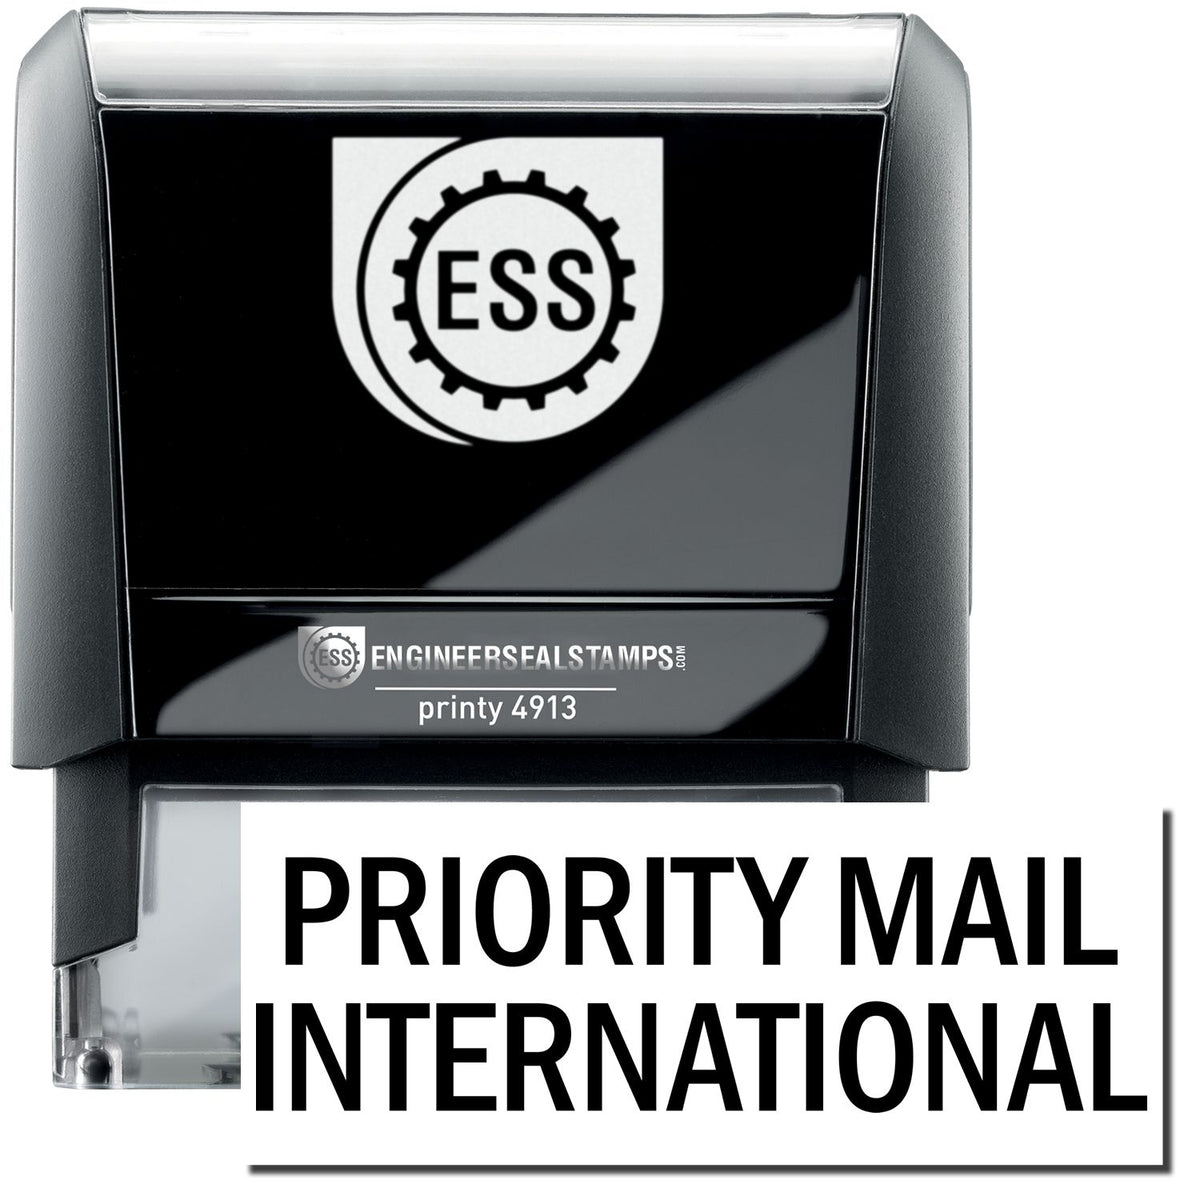 A self-inking stamp with a stamped image showing how the text &quot;PRIORITY MAIL INTERNATIONAL&quot; in a large font is displayed by it after stamping.